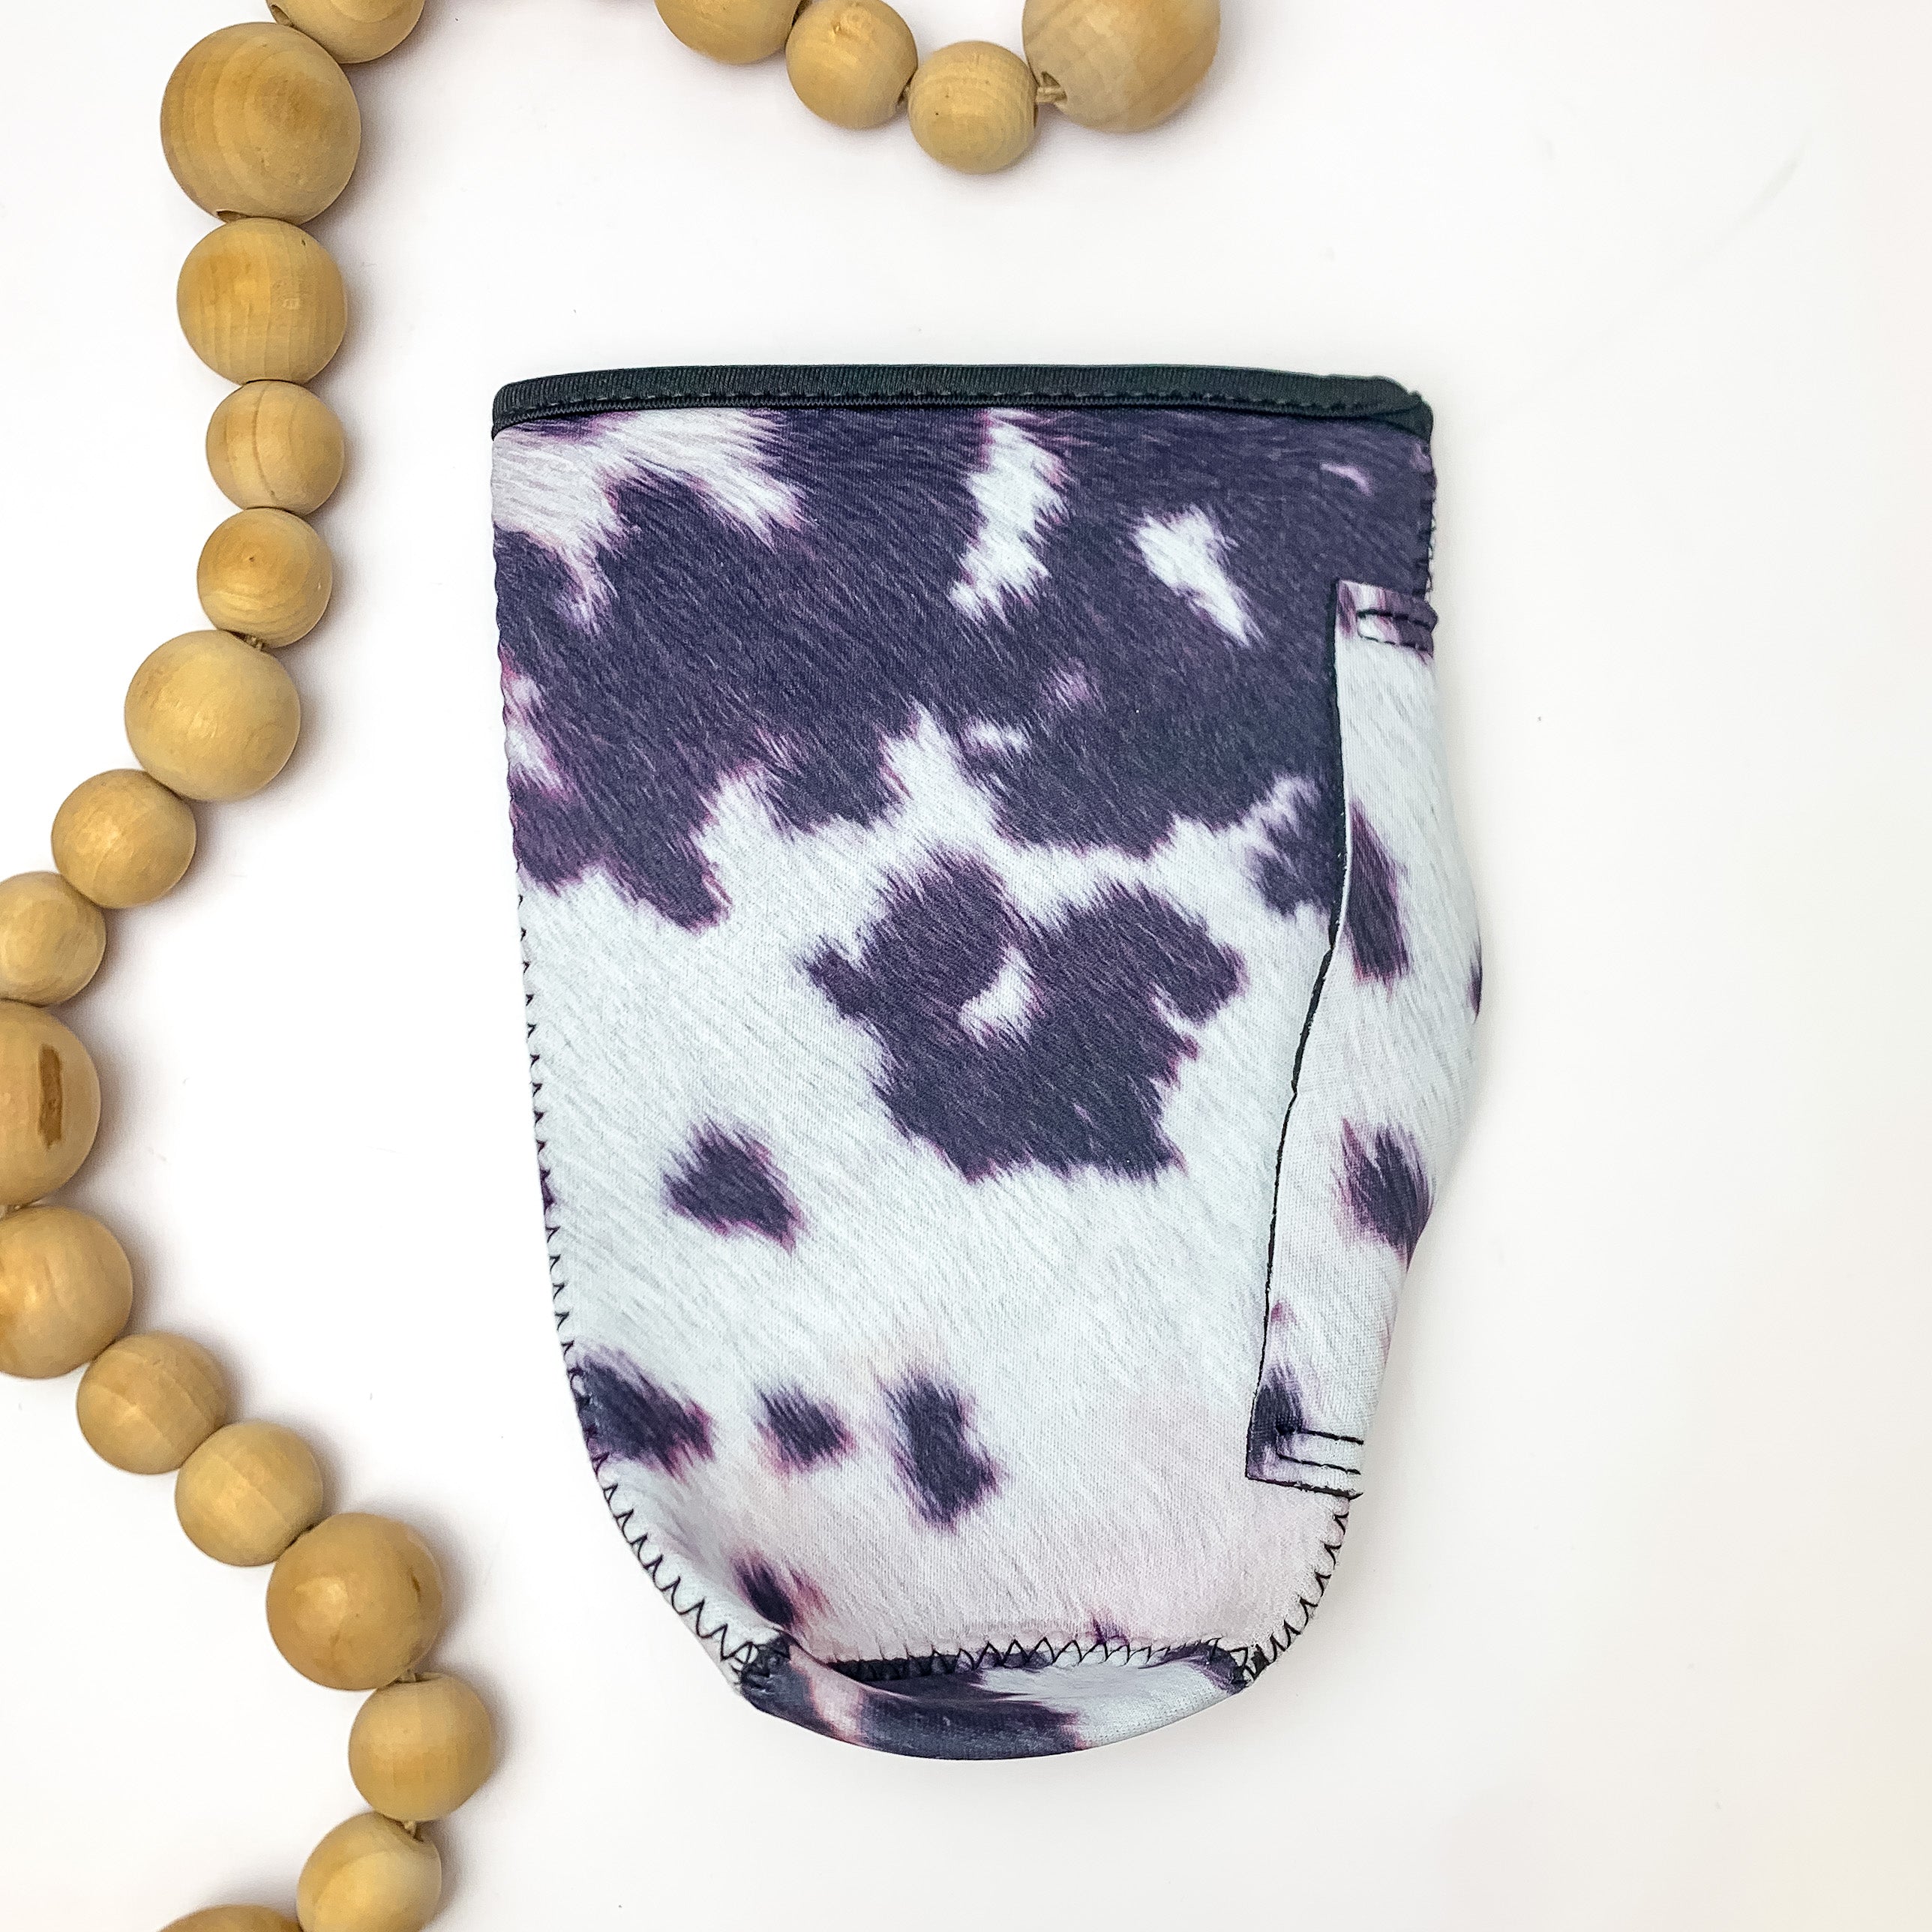 Cow Print Tumbler Drink Sleeve. Pictured on a white background with wood beads next to the koozie for decoration.